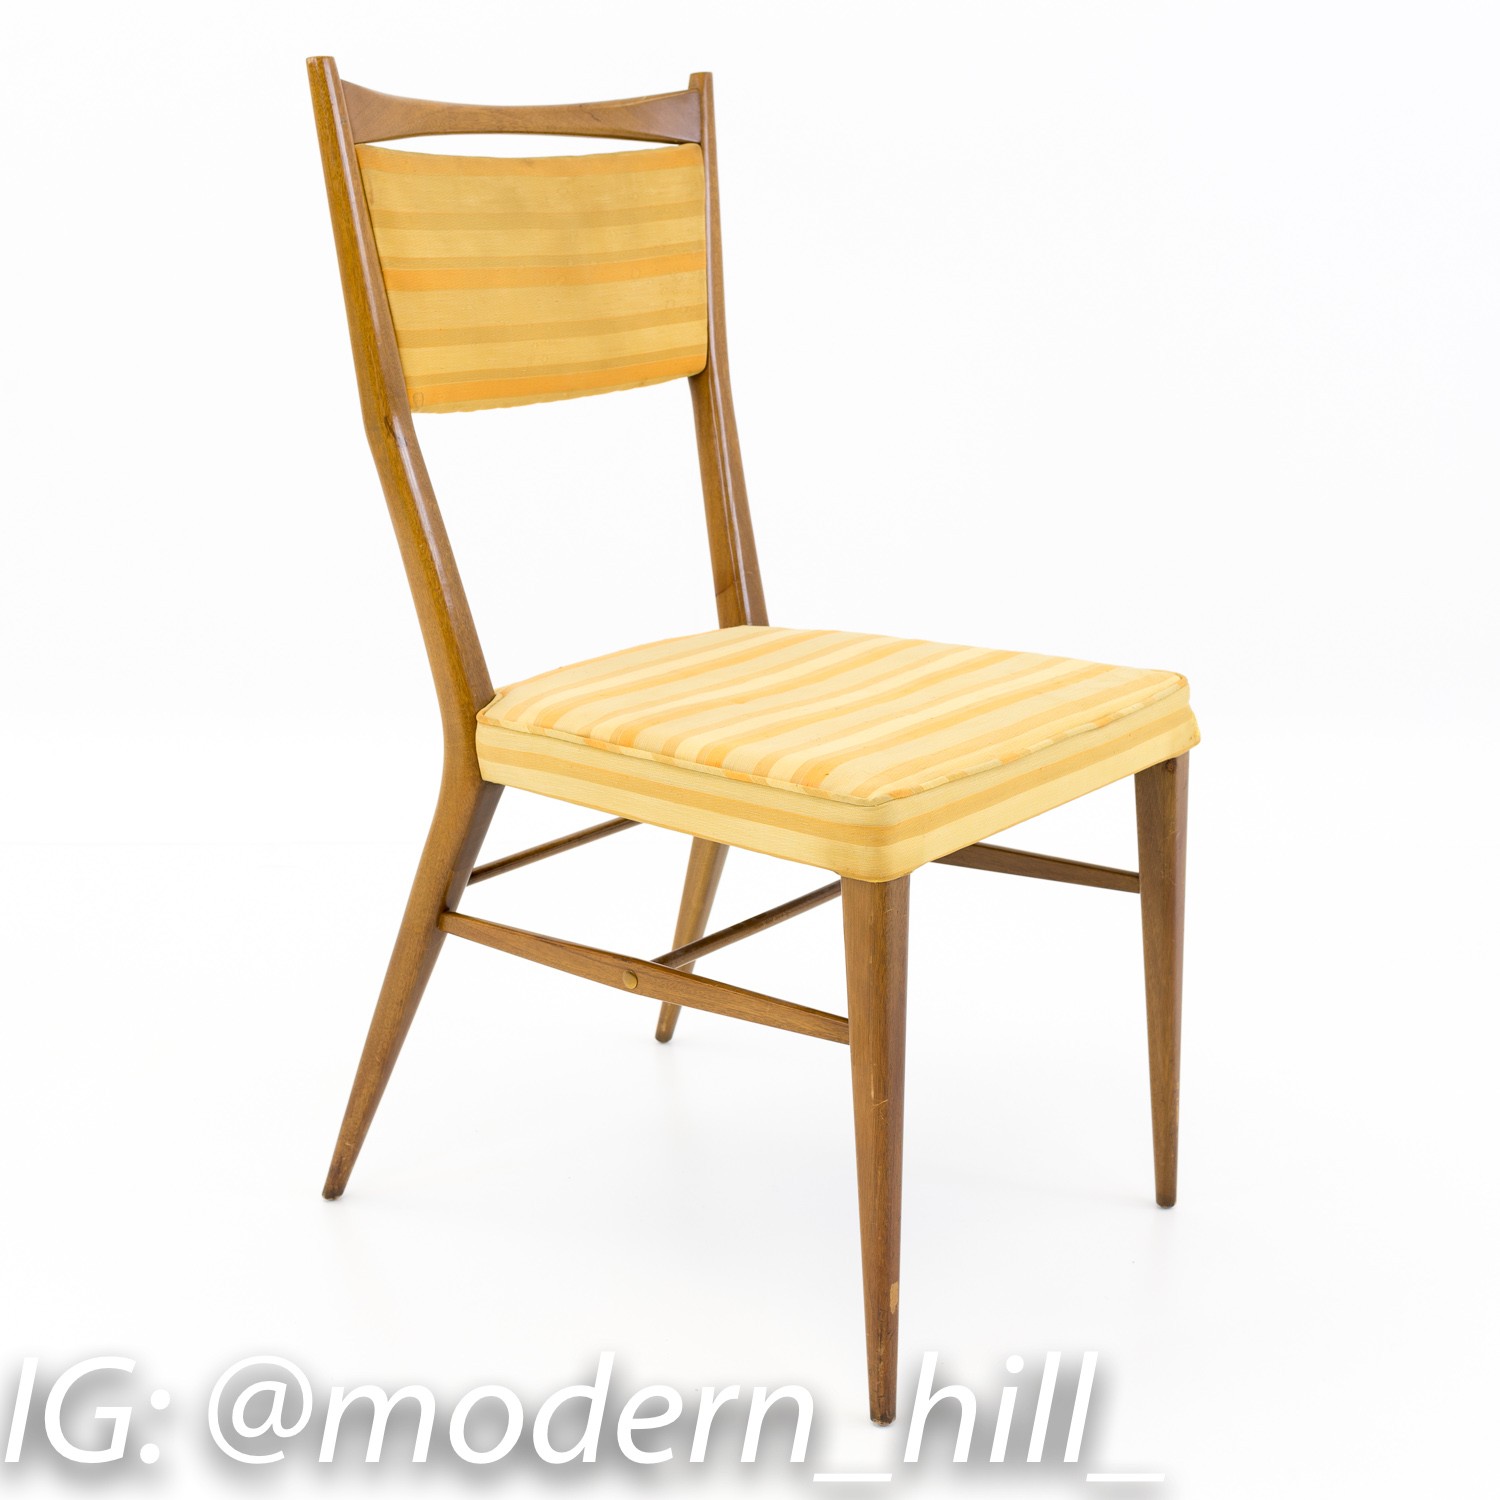 Paul Mccobb for H Sacks & Sons Connoisseur Collection Mid Century Dining Chairs